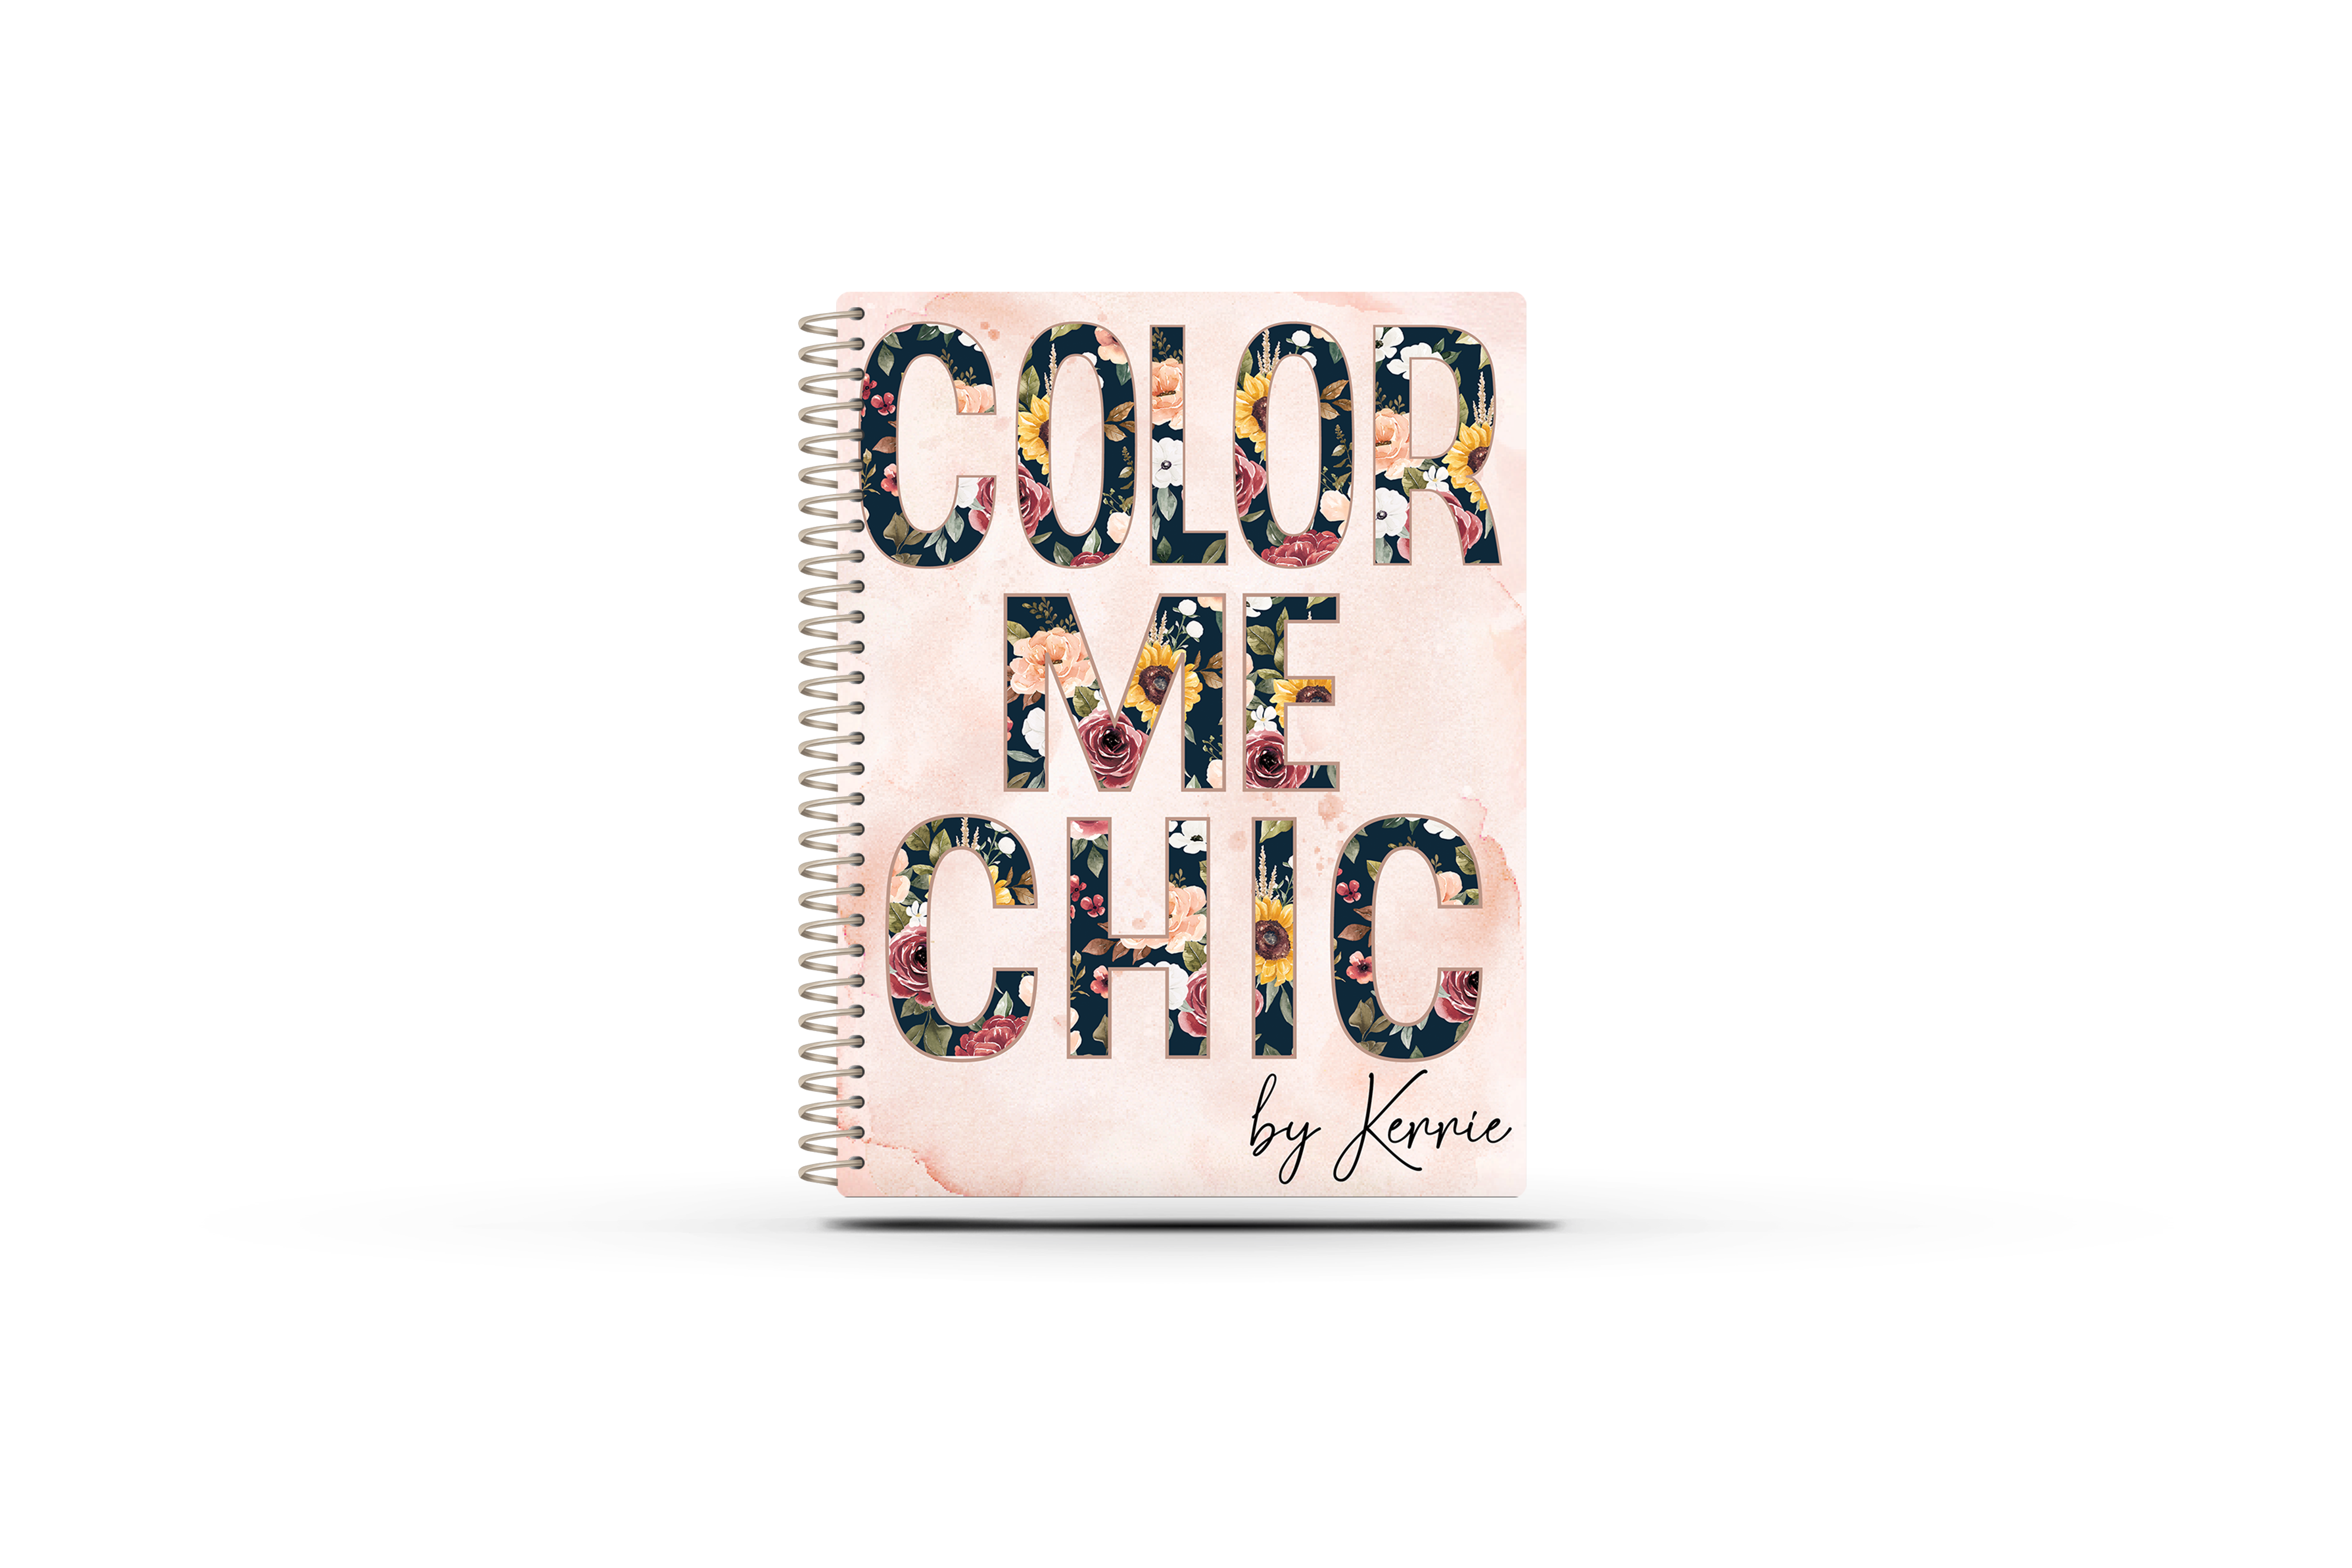 Weekly Planner - COLOR ME CHIC